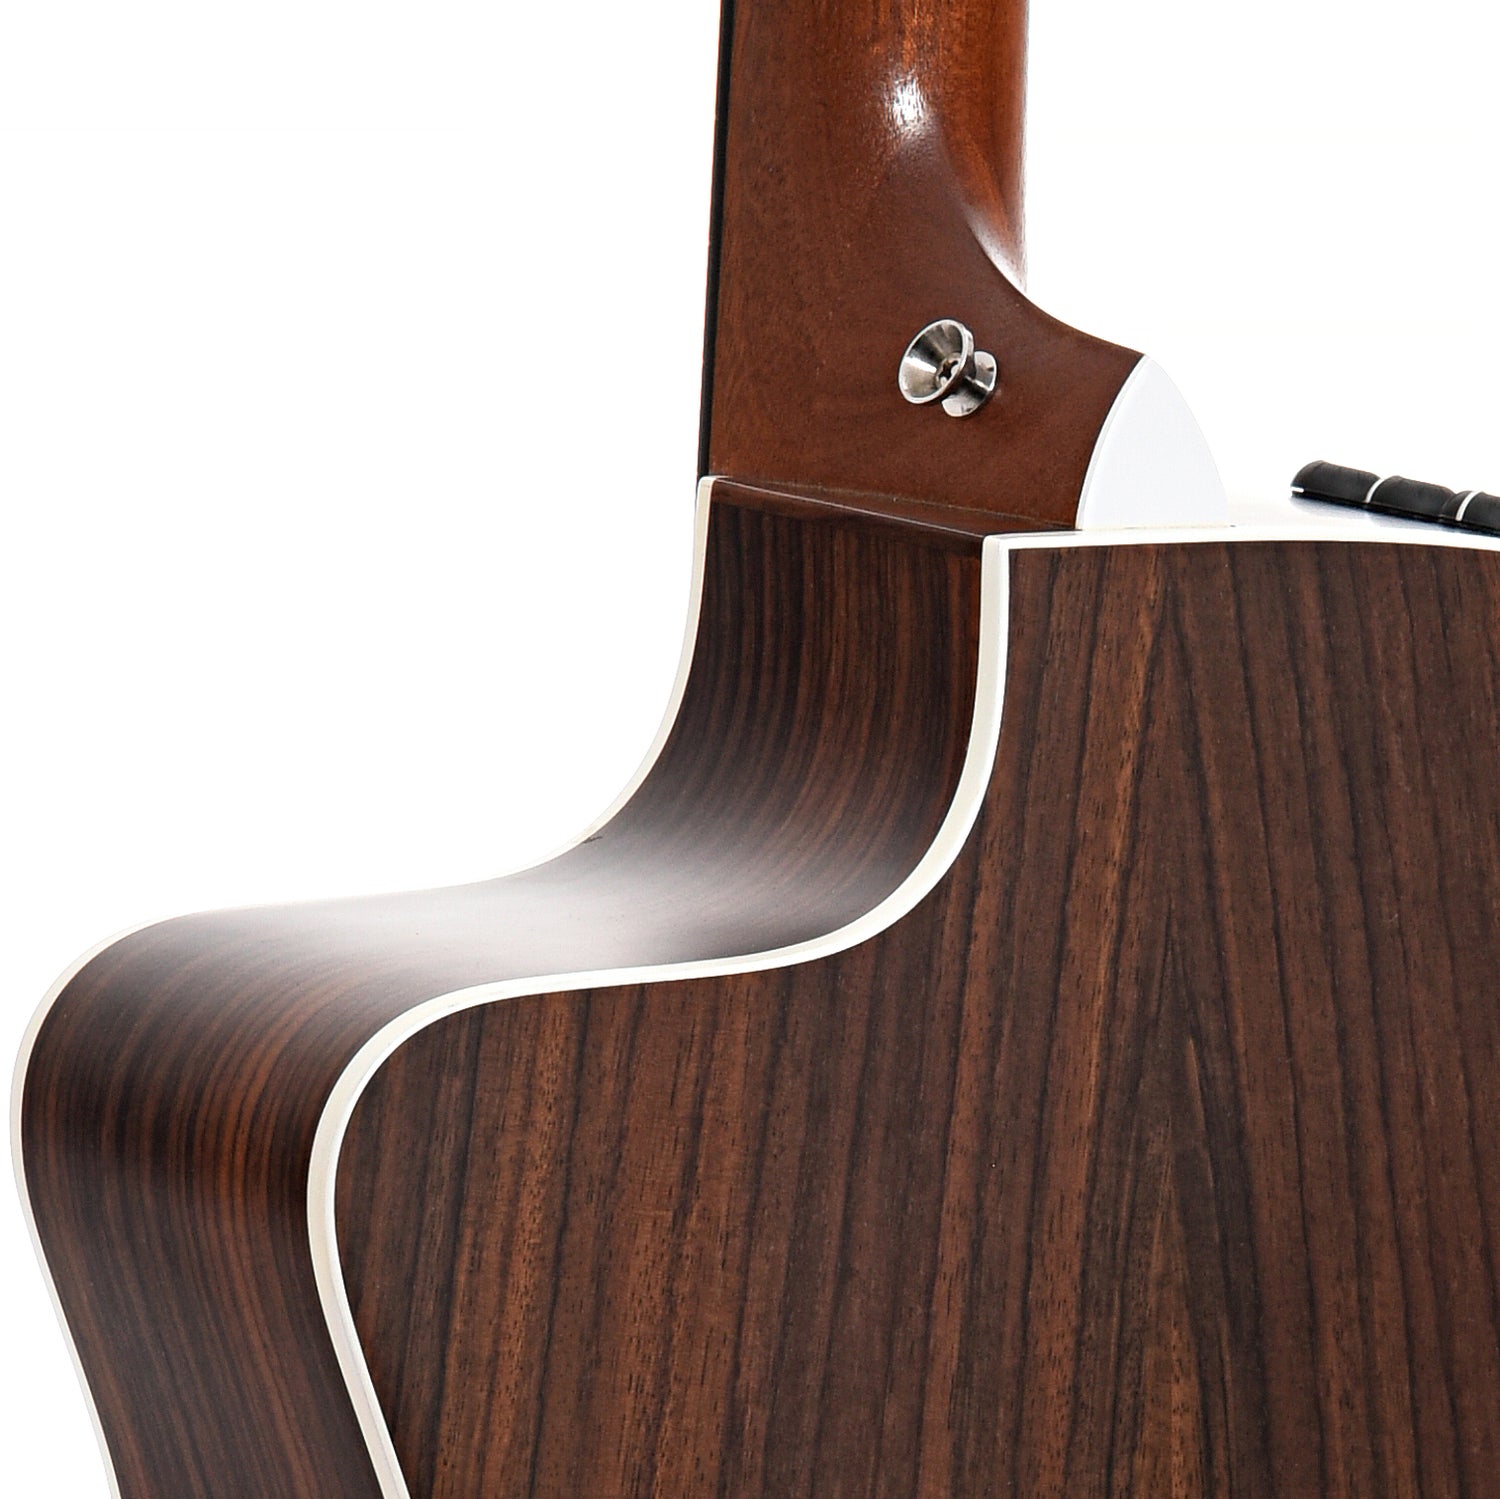 Heel of Taylor 214ce Acoustic 